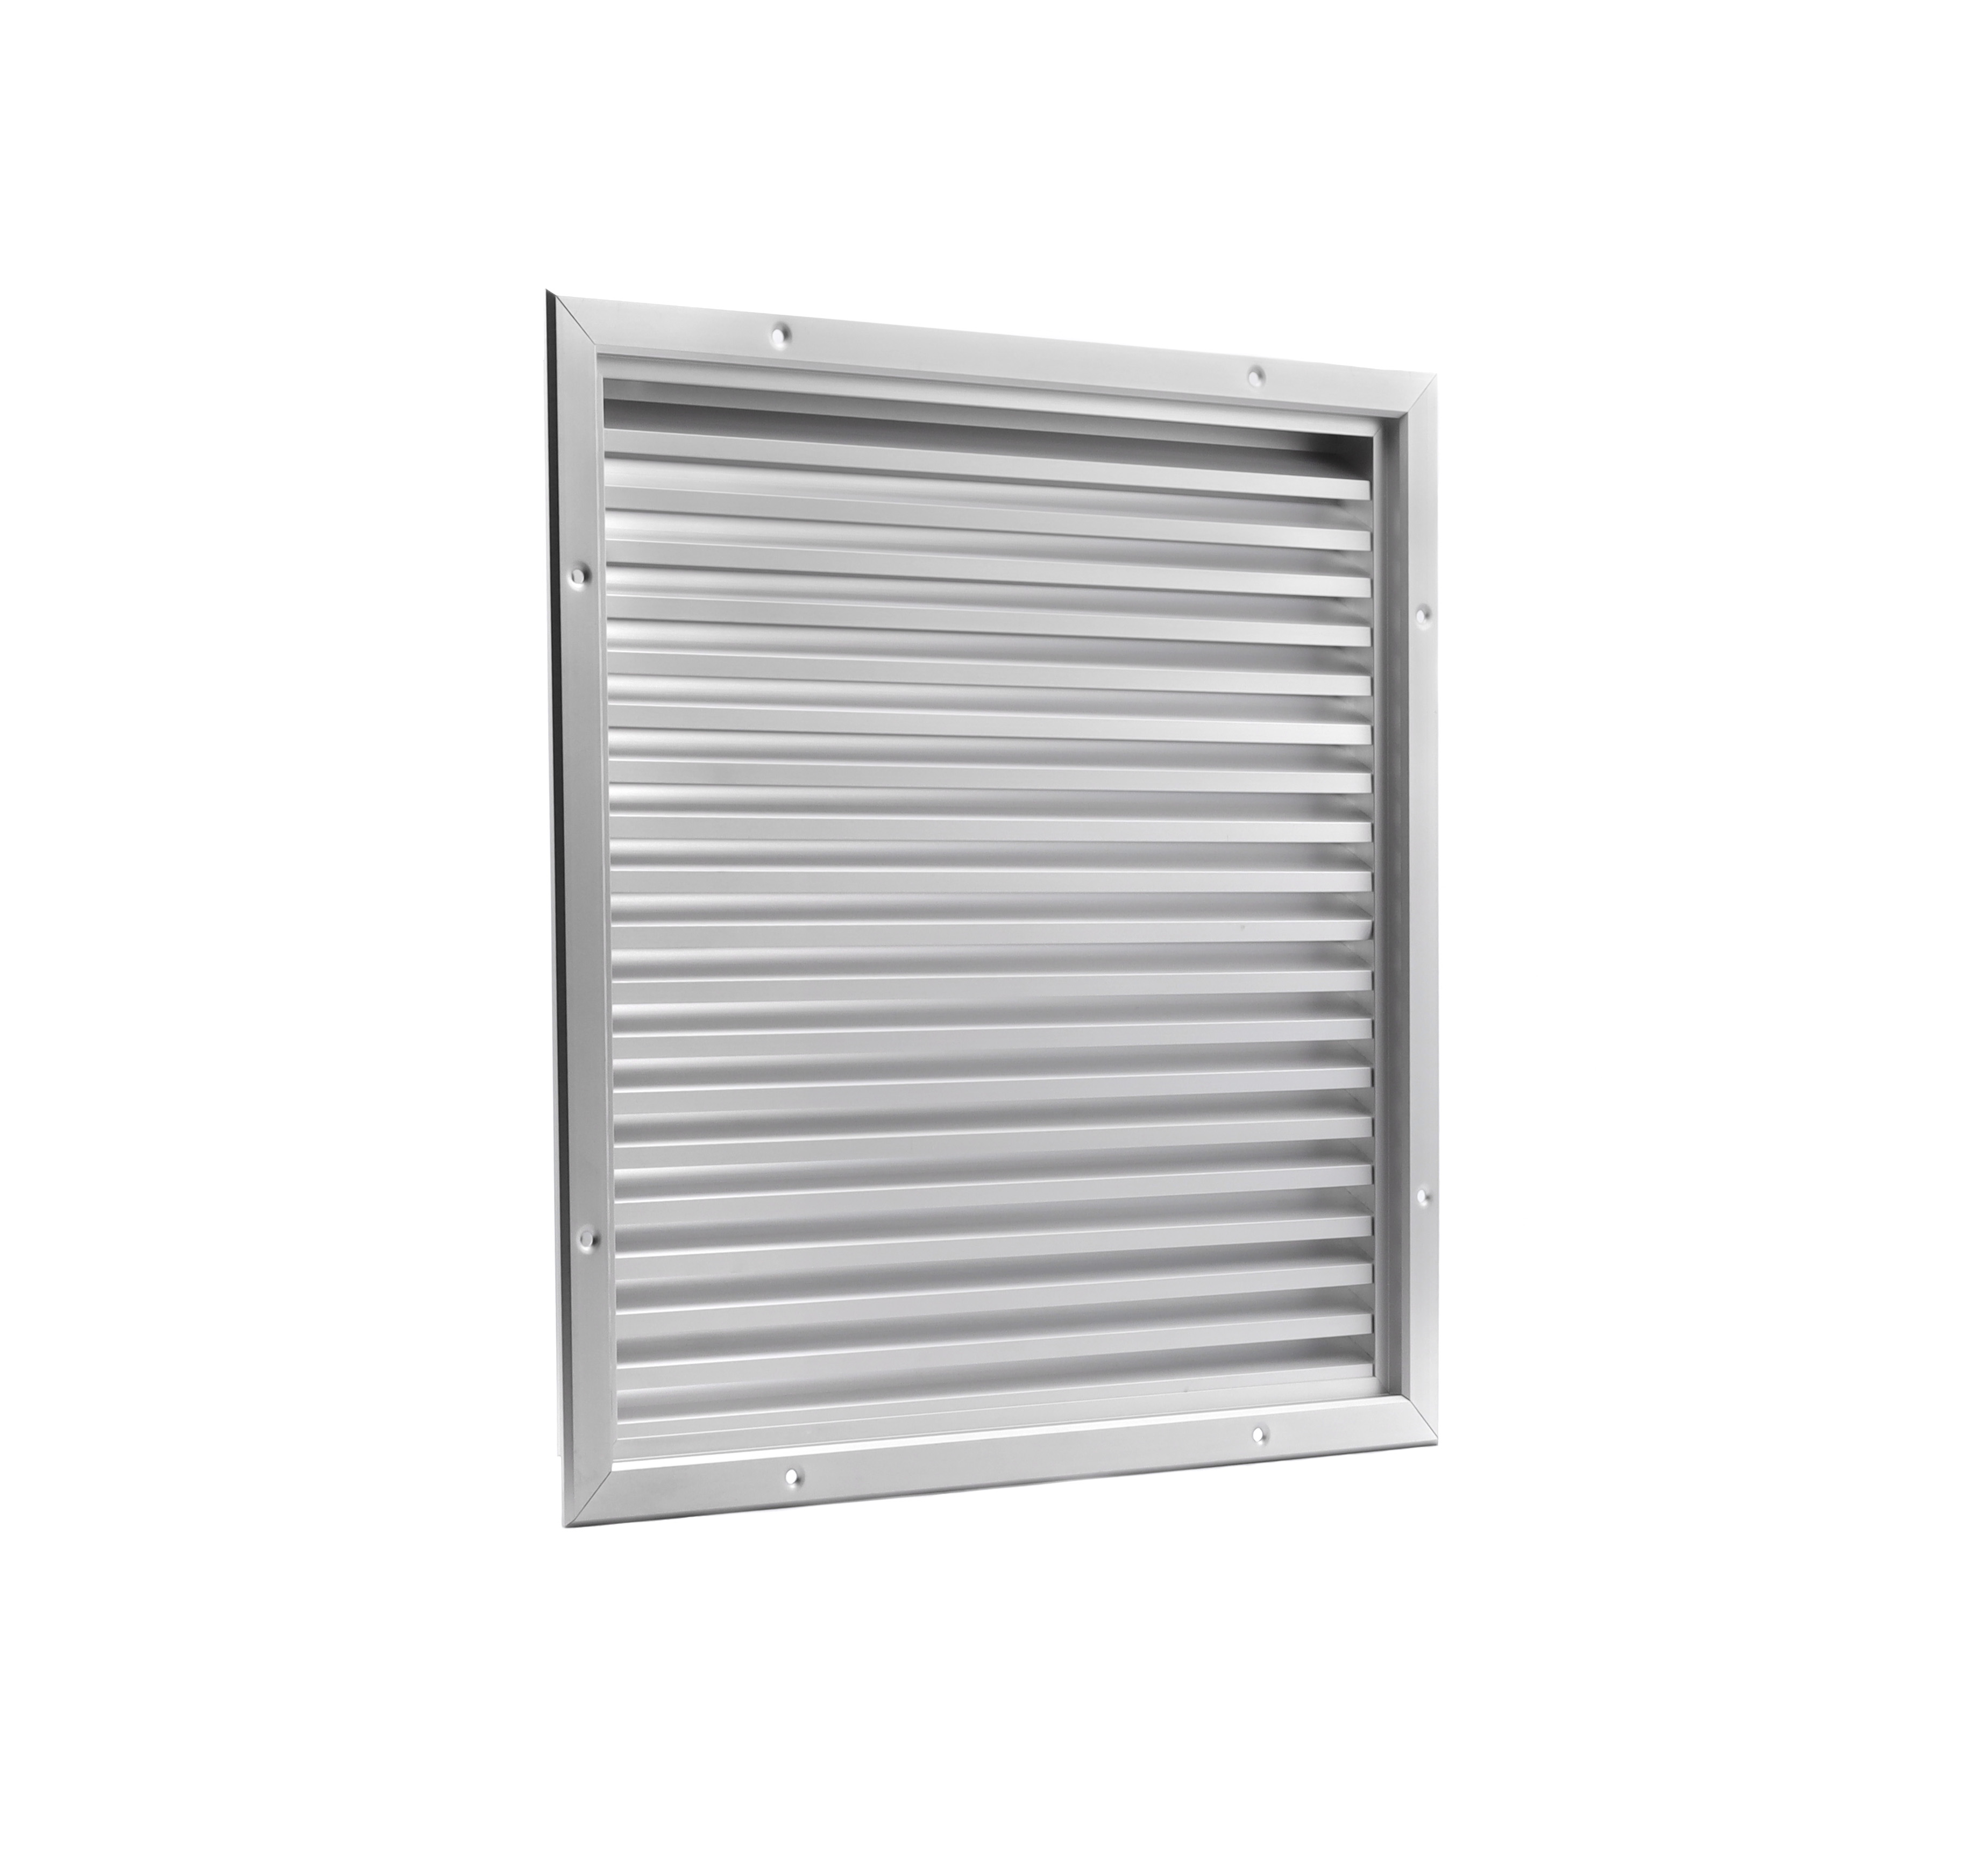 62704717 Alu wall grille with fixed louvres 400x400mm